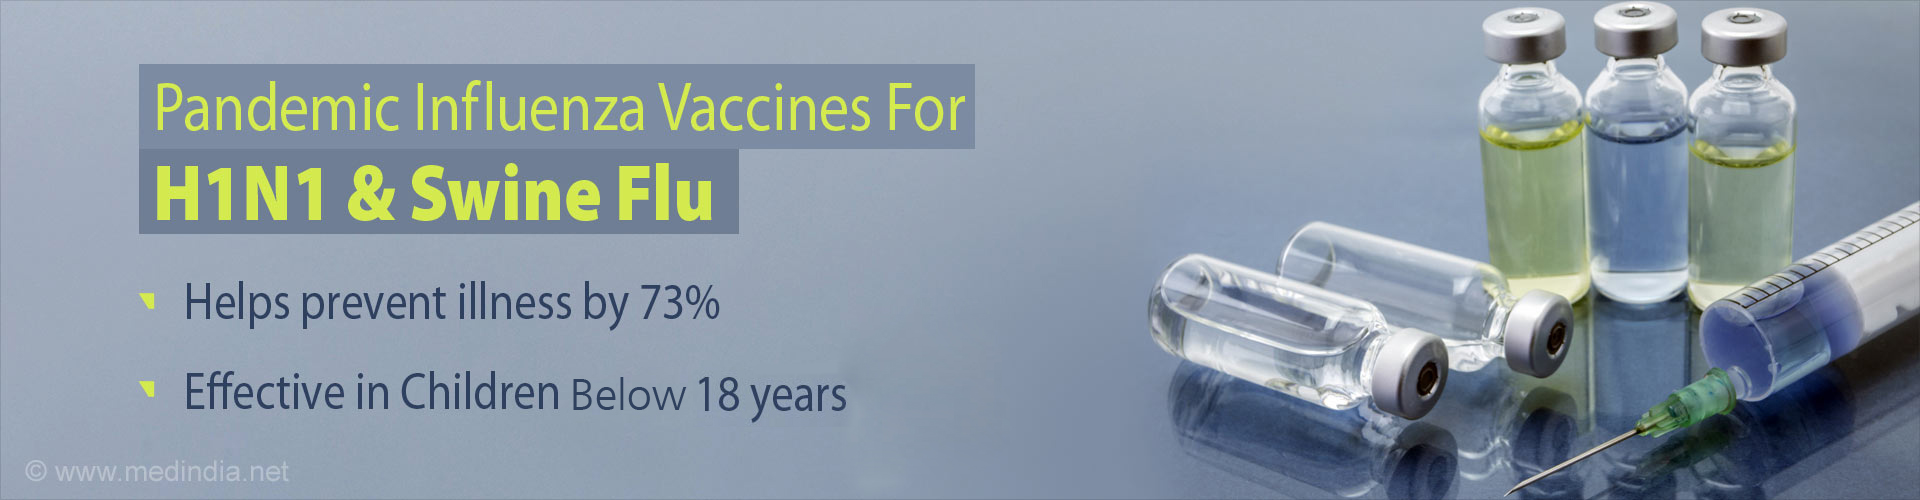 Pandemic influenza vaccine for H1N1 & Swine Flu
- helps prevent illness by 73%
- effective in children less than 18 years